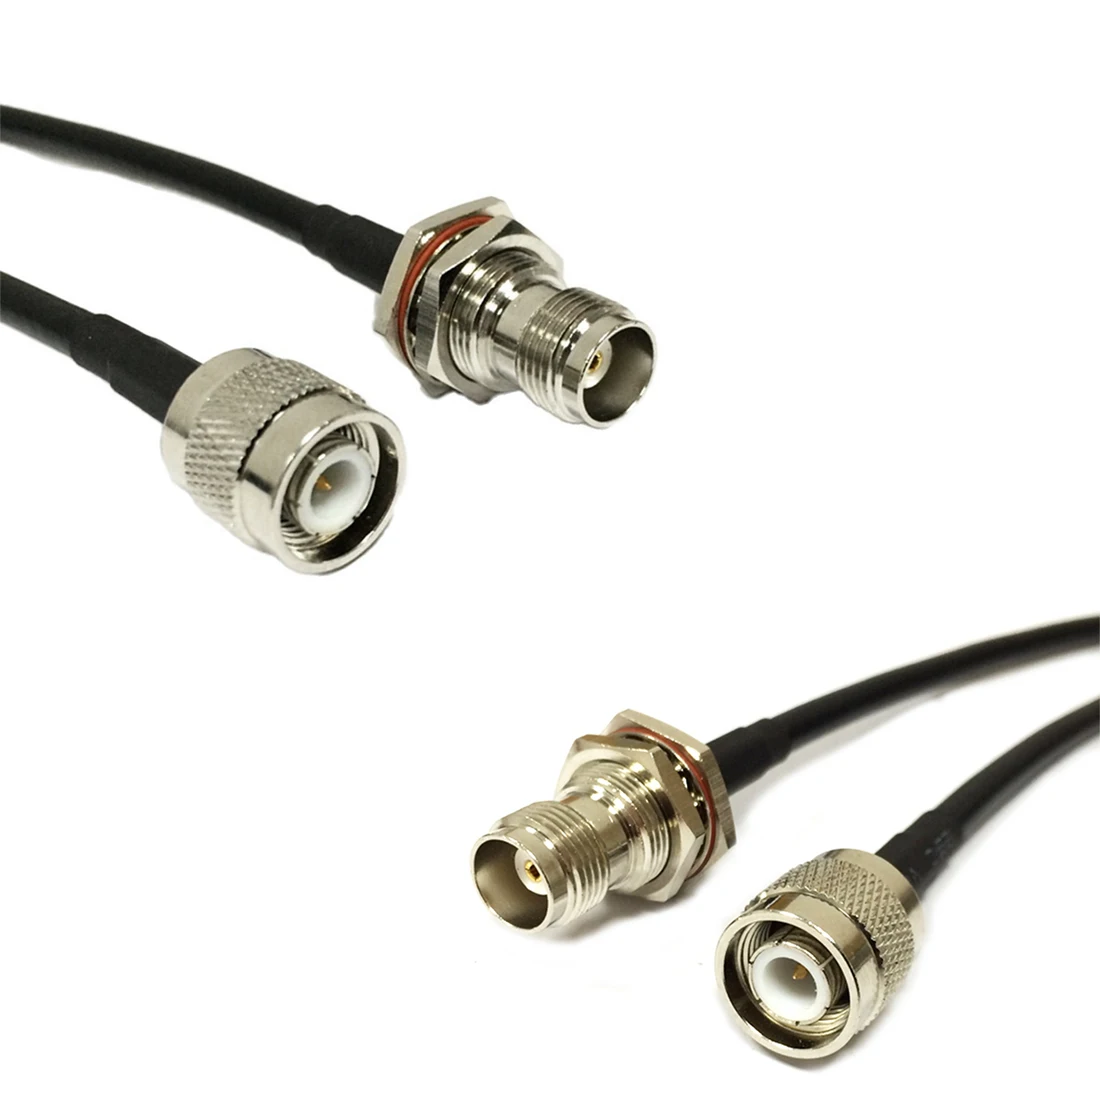 RF Wireless Router Cable TNC Male To Female Bulkhead Pigtail Adapter RG58 50cm/100cm Wholesale